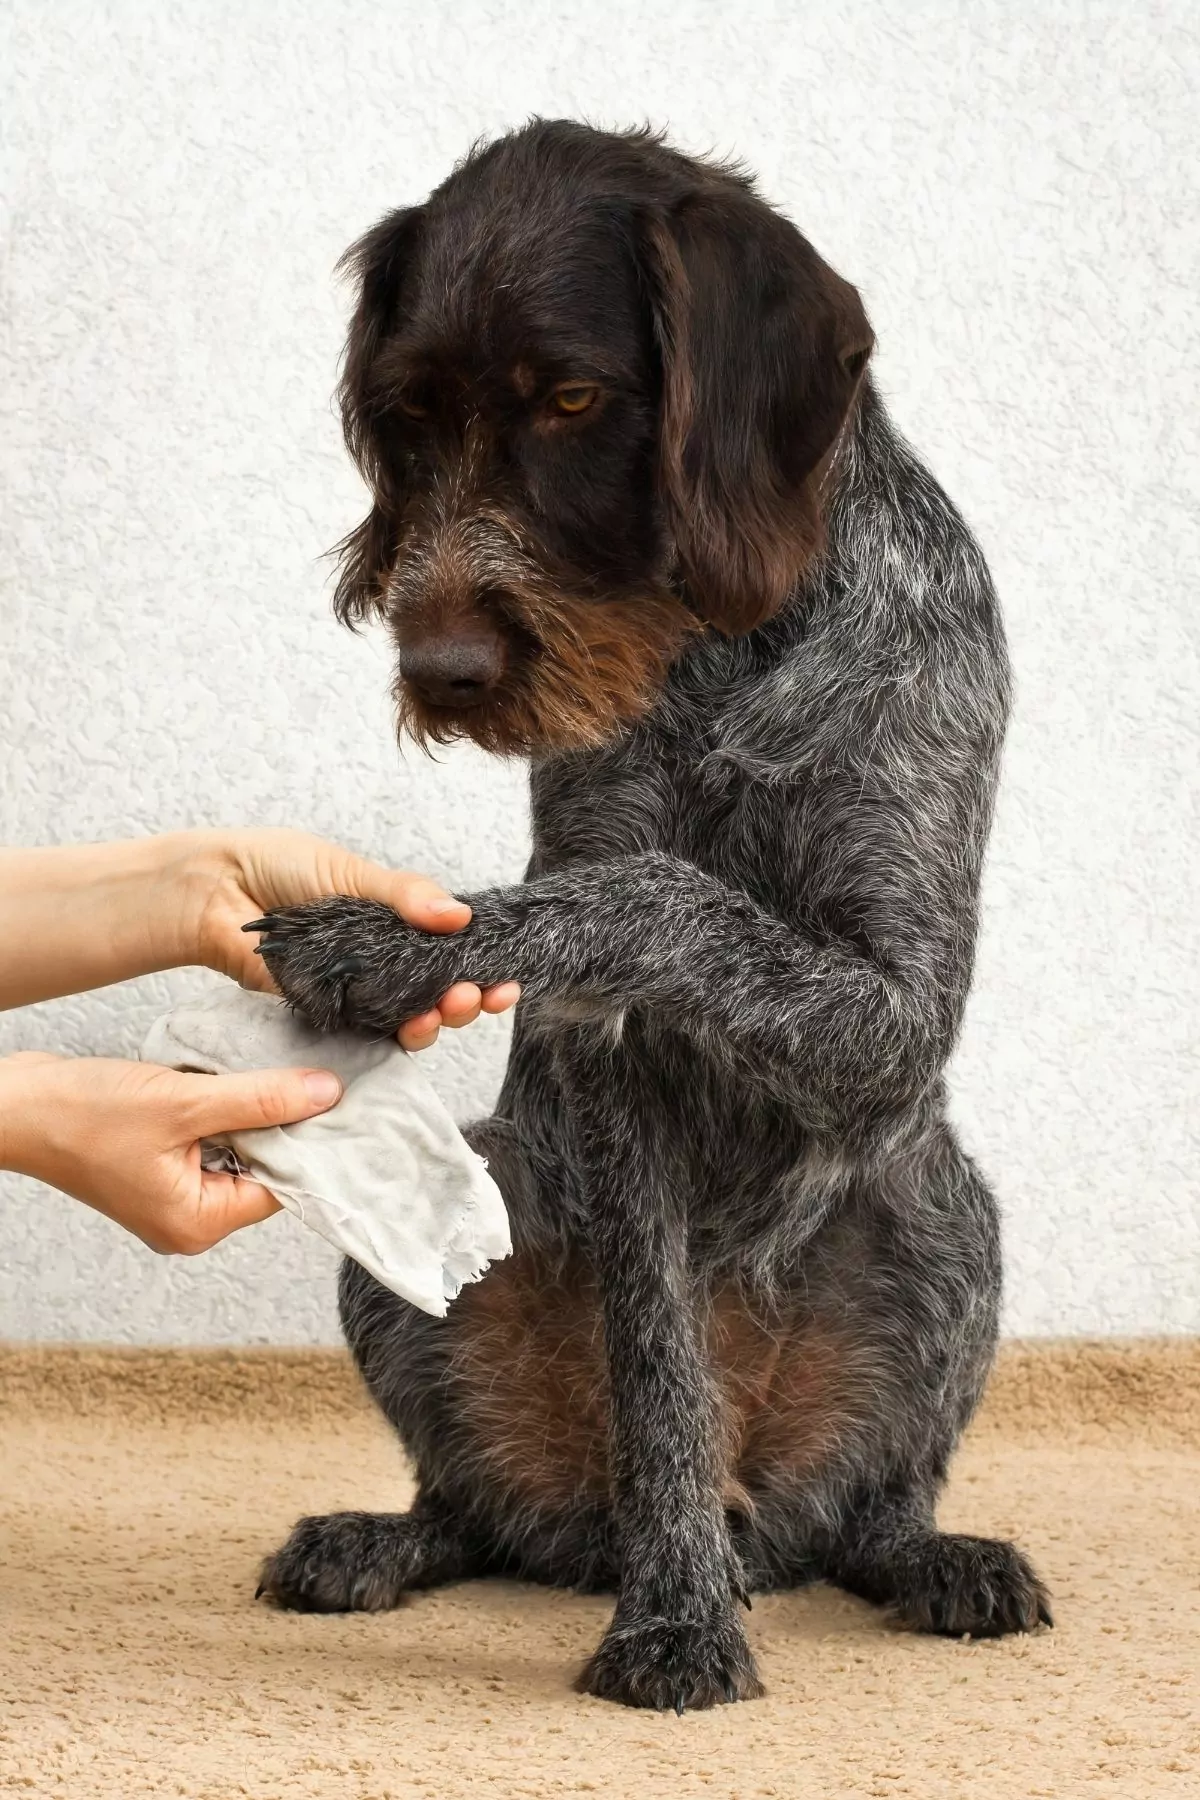 Cleaning dog with wipes